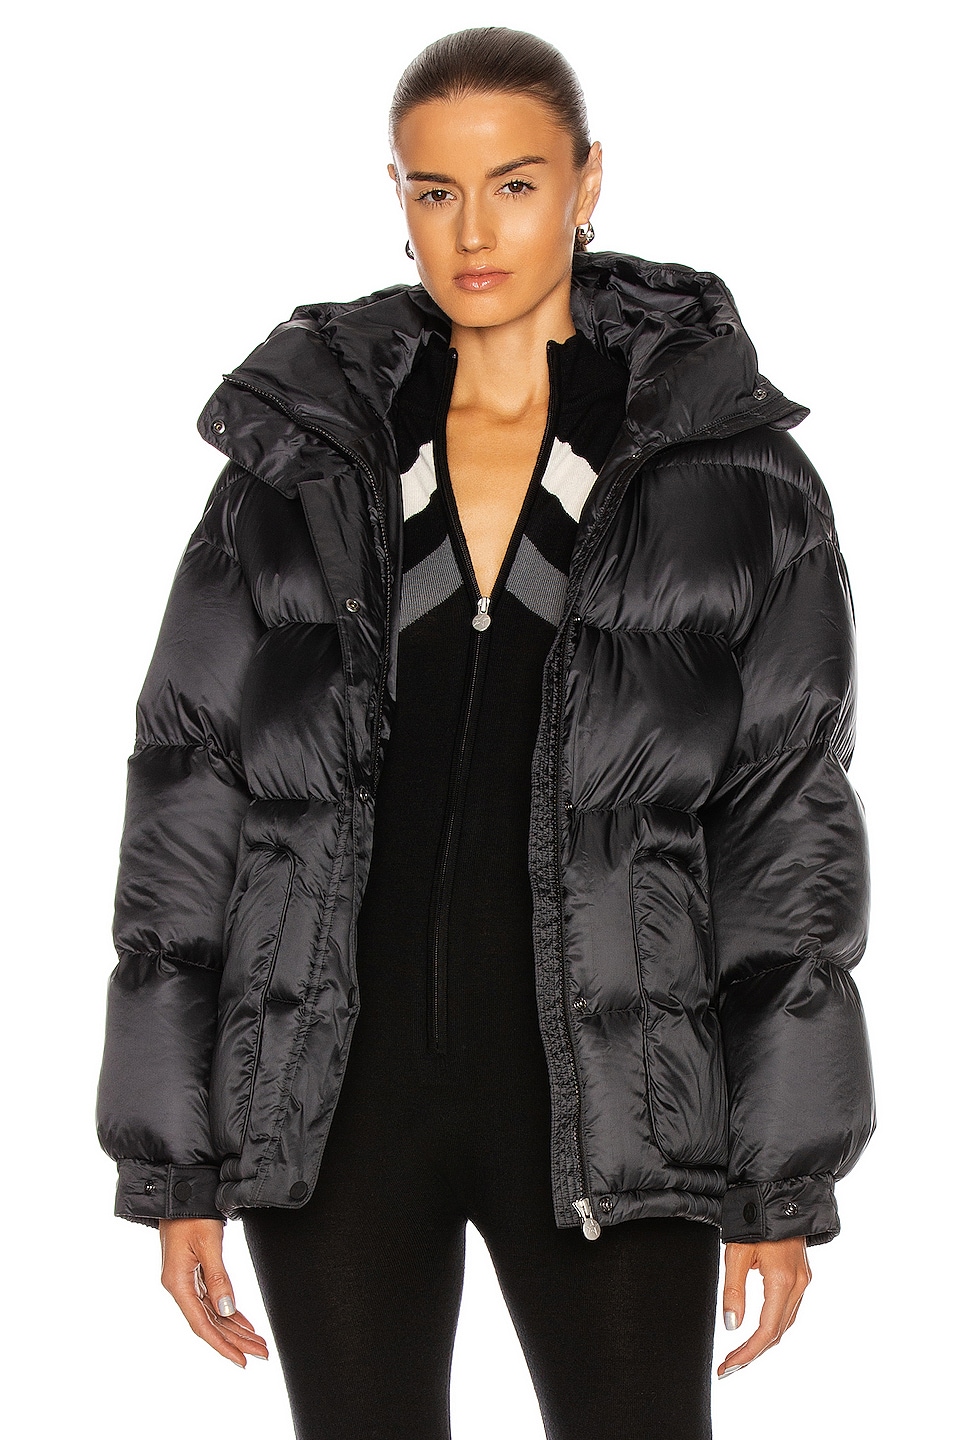 Perfect Moment Oversize Parka II Jacket in Black & Snow White | FWRD